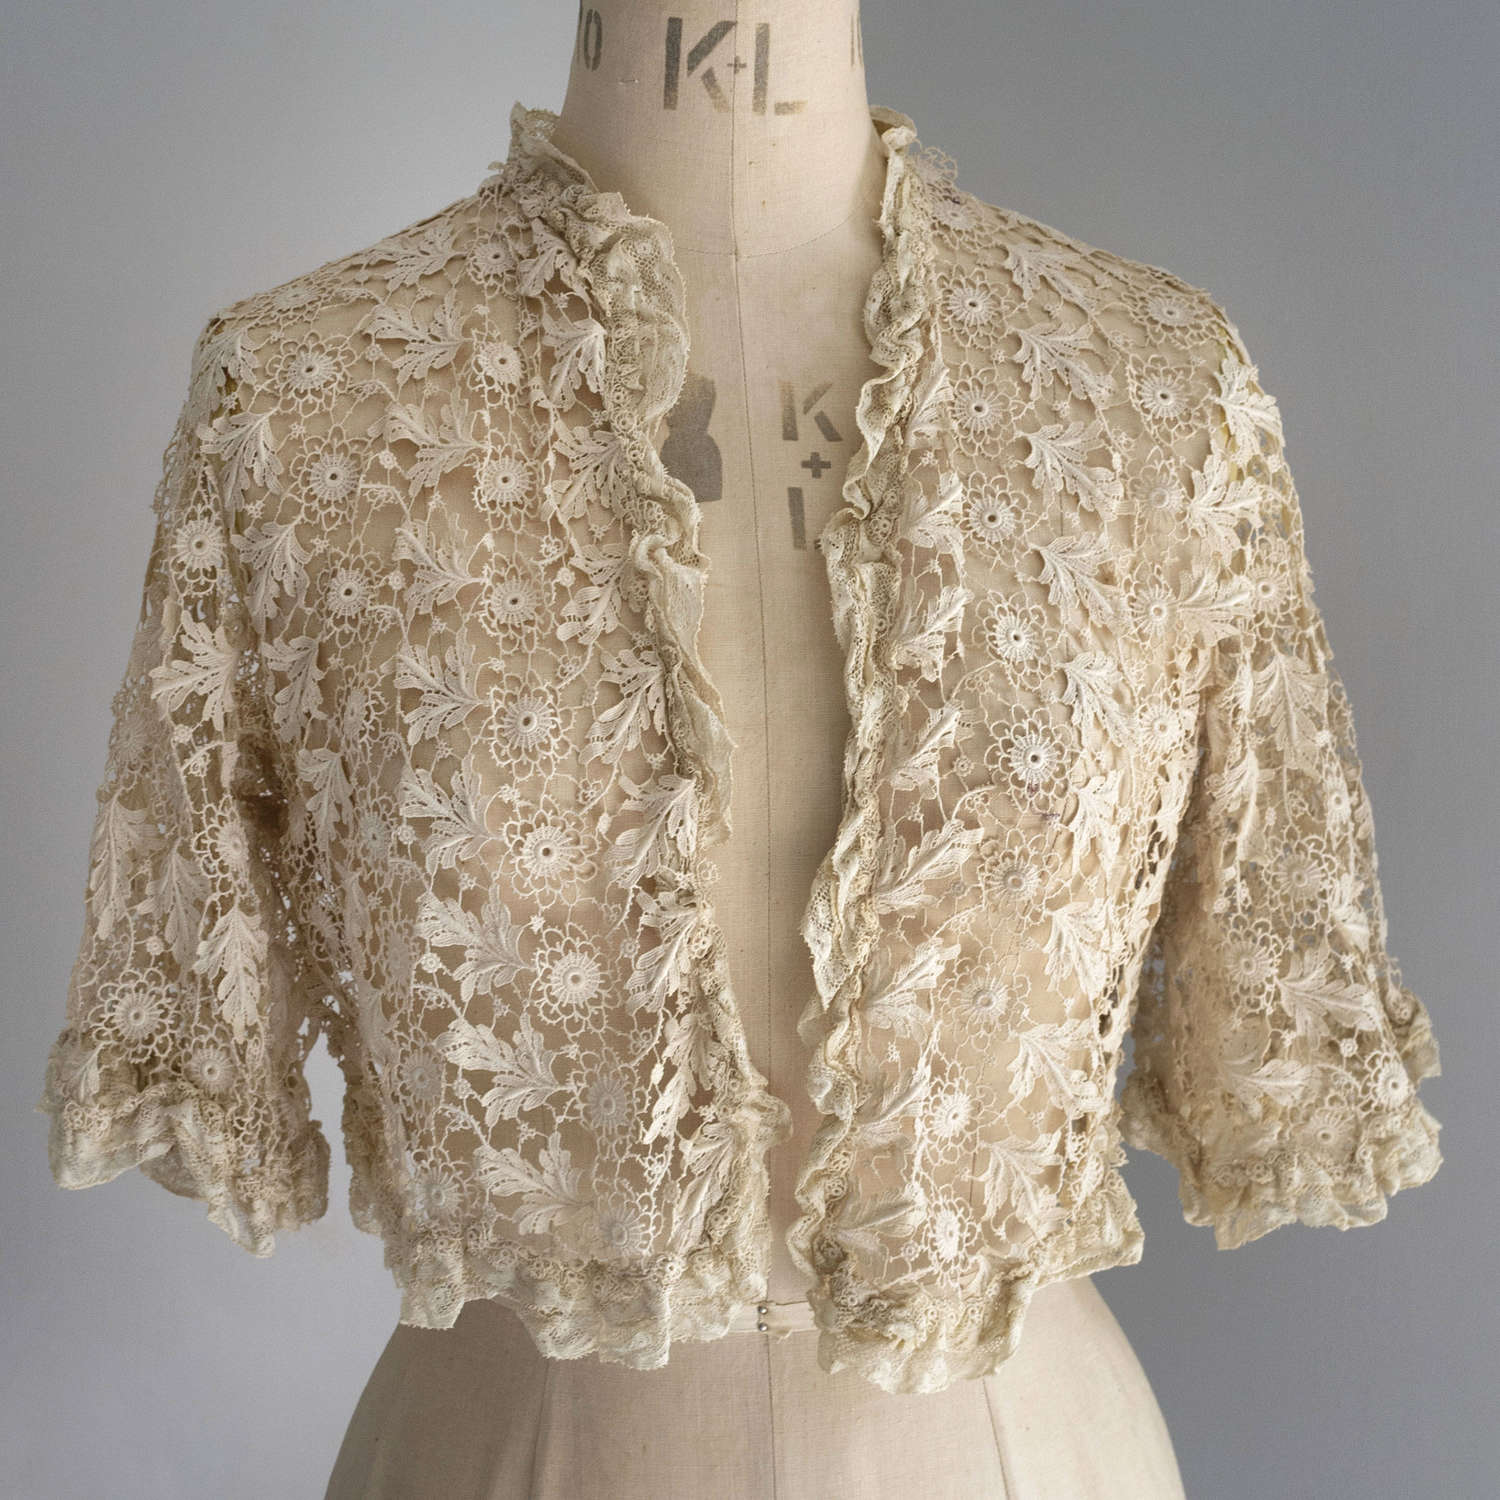 Antique French Machine Guipure Lace Jacket, circa 1910